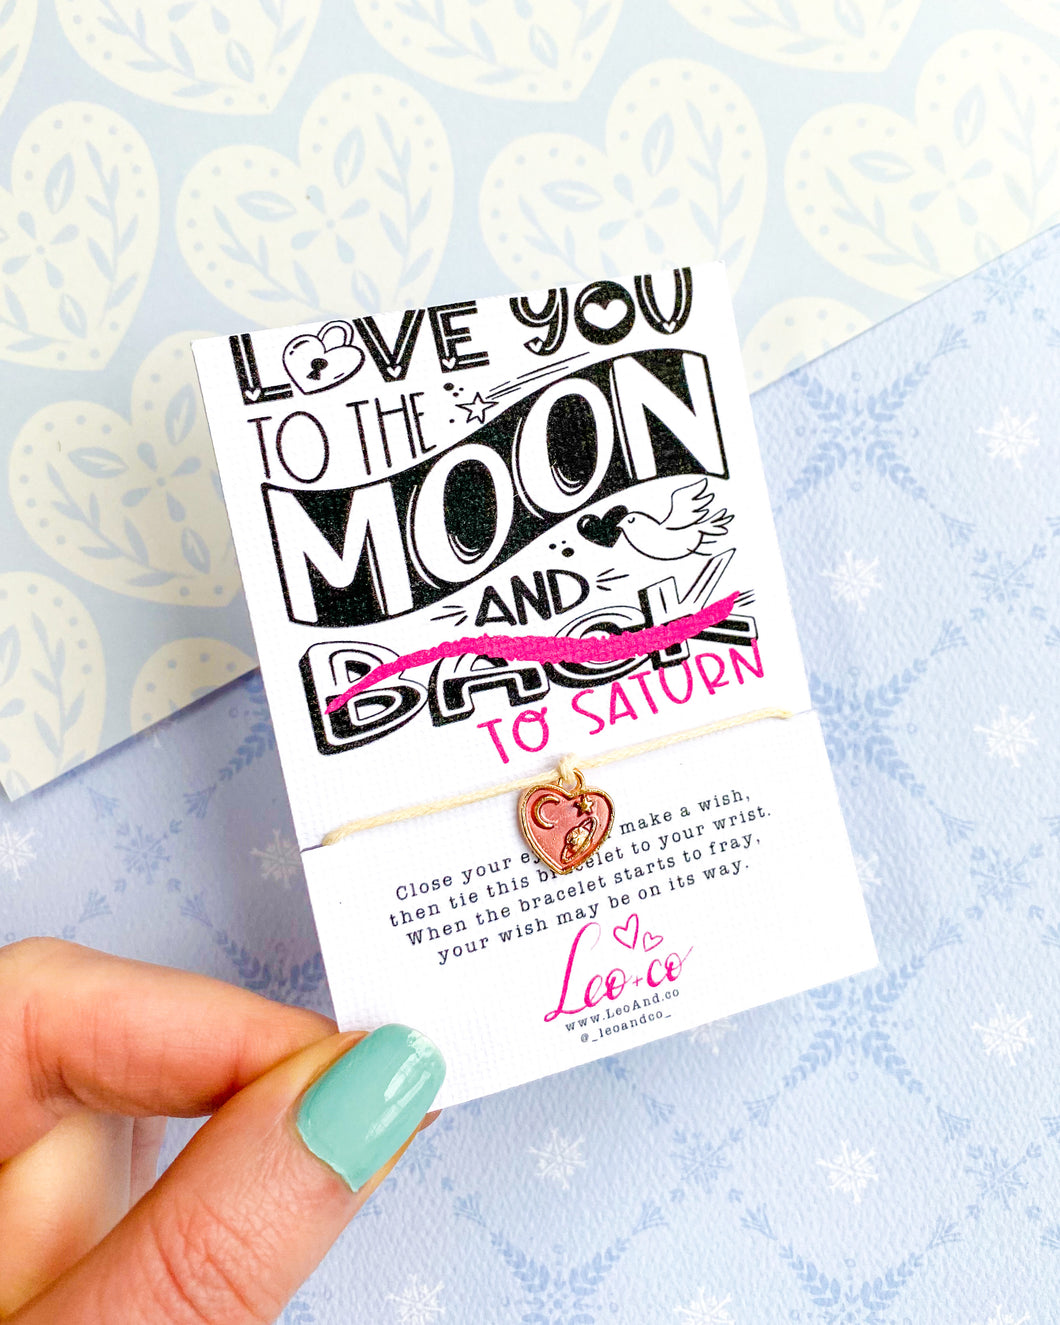 Love You To The Moon and To Saturn Wish Bracelet